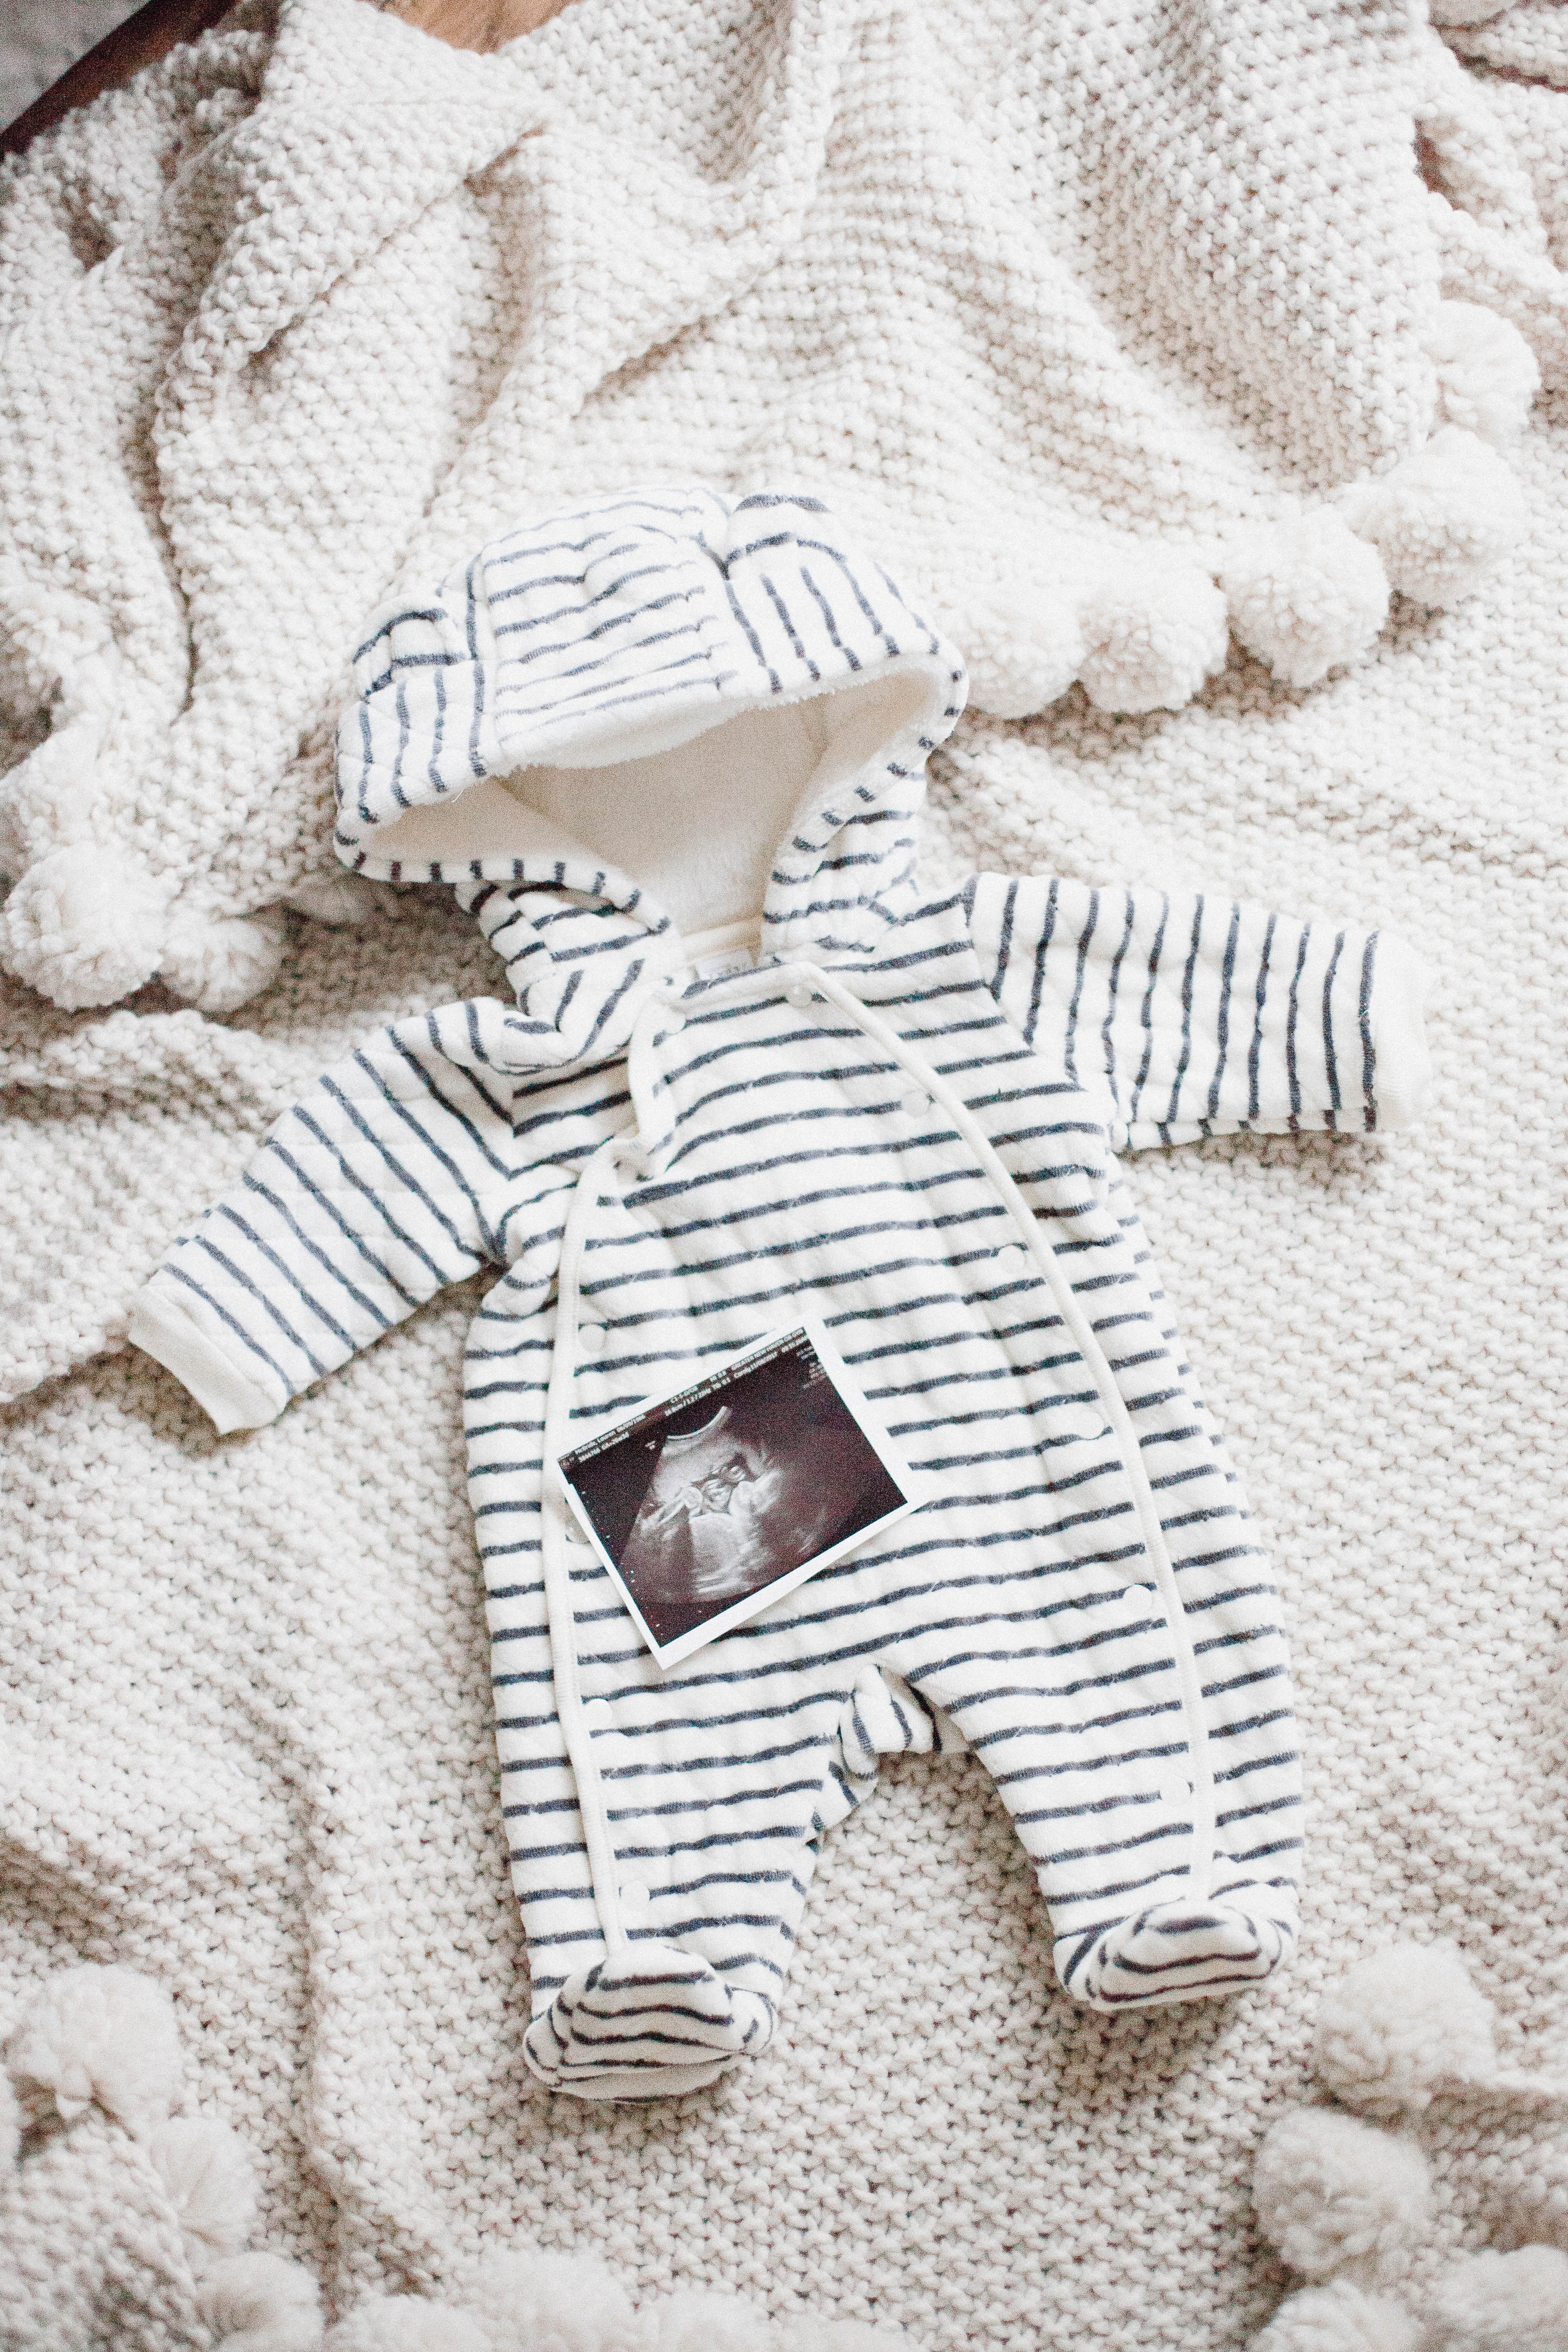 Life and style blogger Lauren McBride shares her Newborn Clothing Essentials for the winter season!